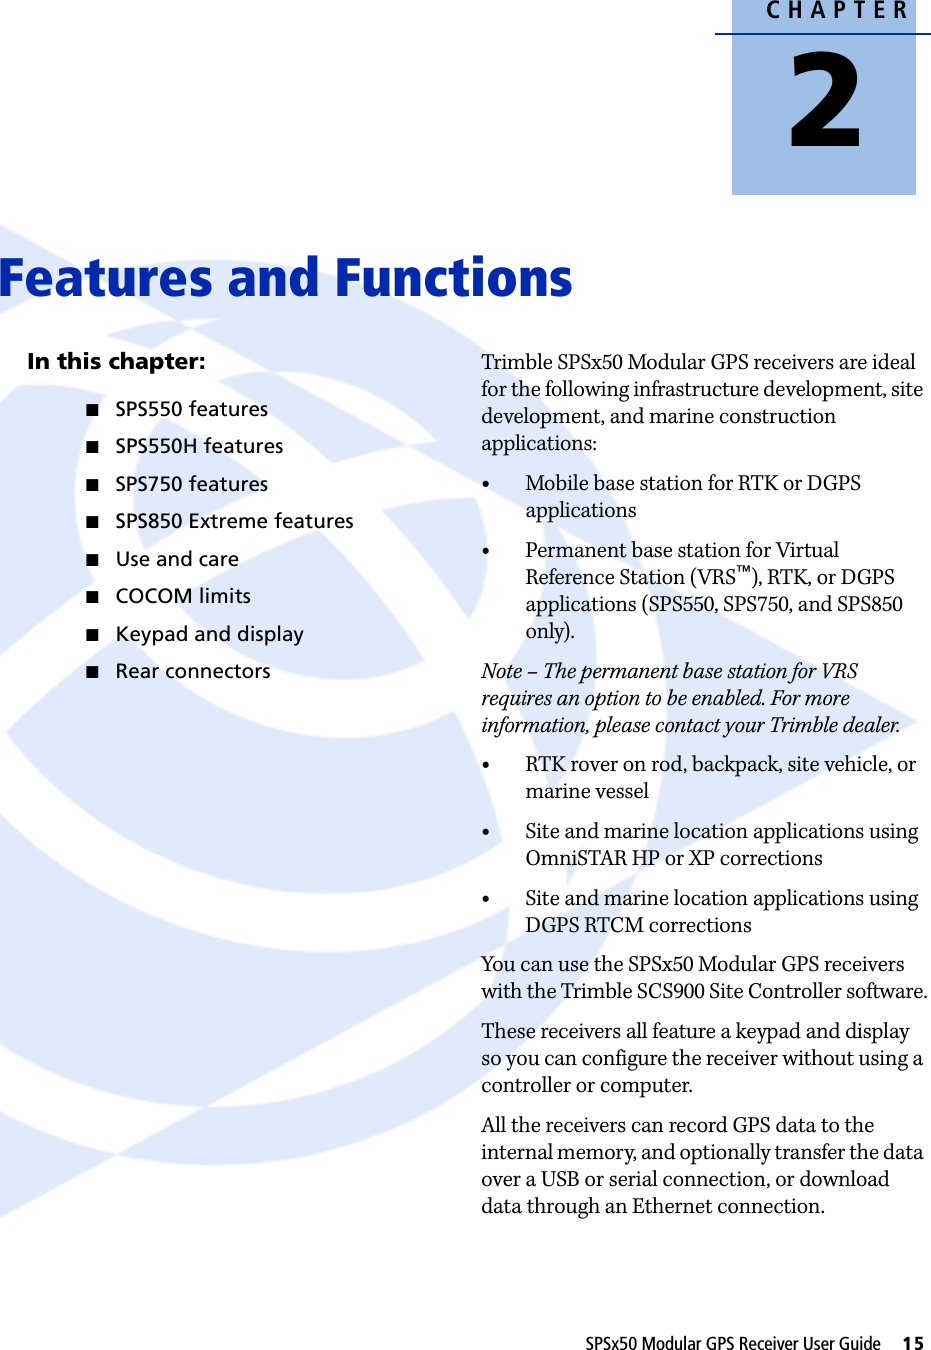 CHAPTER2SPSx50 Modular GPS Receiver User Guide     15Features and Functions 2In this chapter:QSPS550 featuresQSPS550H featuresQSPS750 featuresQSPS850 Extreme featuresQUse and careQCOCOM limitsQKeypad and displayQRear connectorsTrimble SPSx50 Modular GPS receivers are ideal for the following infrastructure development, site development, and marine construction applications:•Mobile base station for RTK or DGPS applications•Permanent base station for Virtual Reference Station (VRS™), RTK, or DGPS applications (SPS550, SPS750, and SPS850 only).Note – The permanent base station for VRS requires an option to be enabled. For more information, please contact your Trimble dealer.•RTK rover on rod, backpack, site vehicle, or marine vessel•Site and marine location applications using OmniSTAR HP or XP corrections•Site and marine location applications using DGPS RTCM correctionsYou can use the SPSx50 Modular GPS receivers with the Trimble SCS900 Site Controller software.These receivers all feature a keypad and display so you can configure the receiver without using a controller or computer.All the receivers can record GPS data to the internal memory, and optionally transfer the data over a USB or serial connection, or download data through an Ethernet connection.